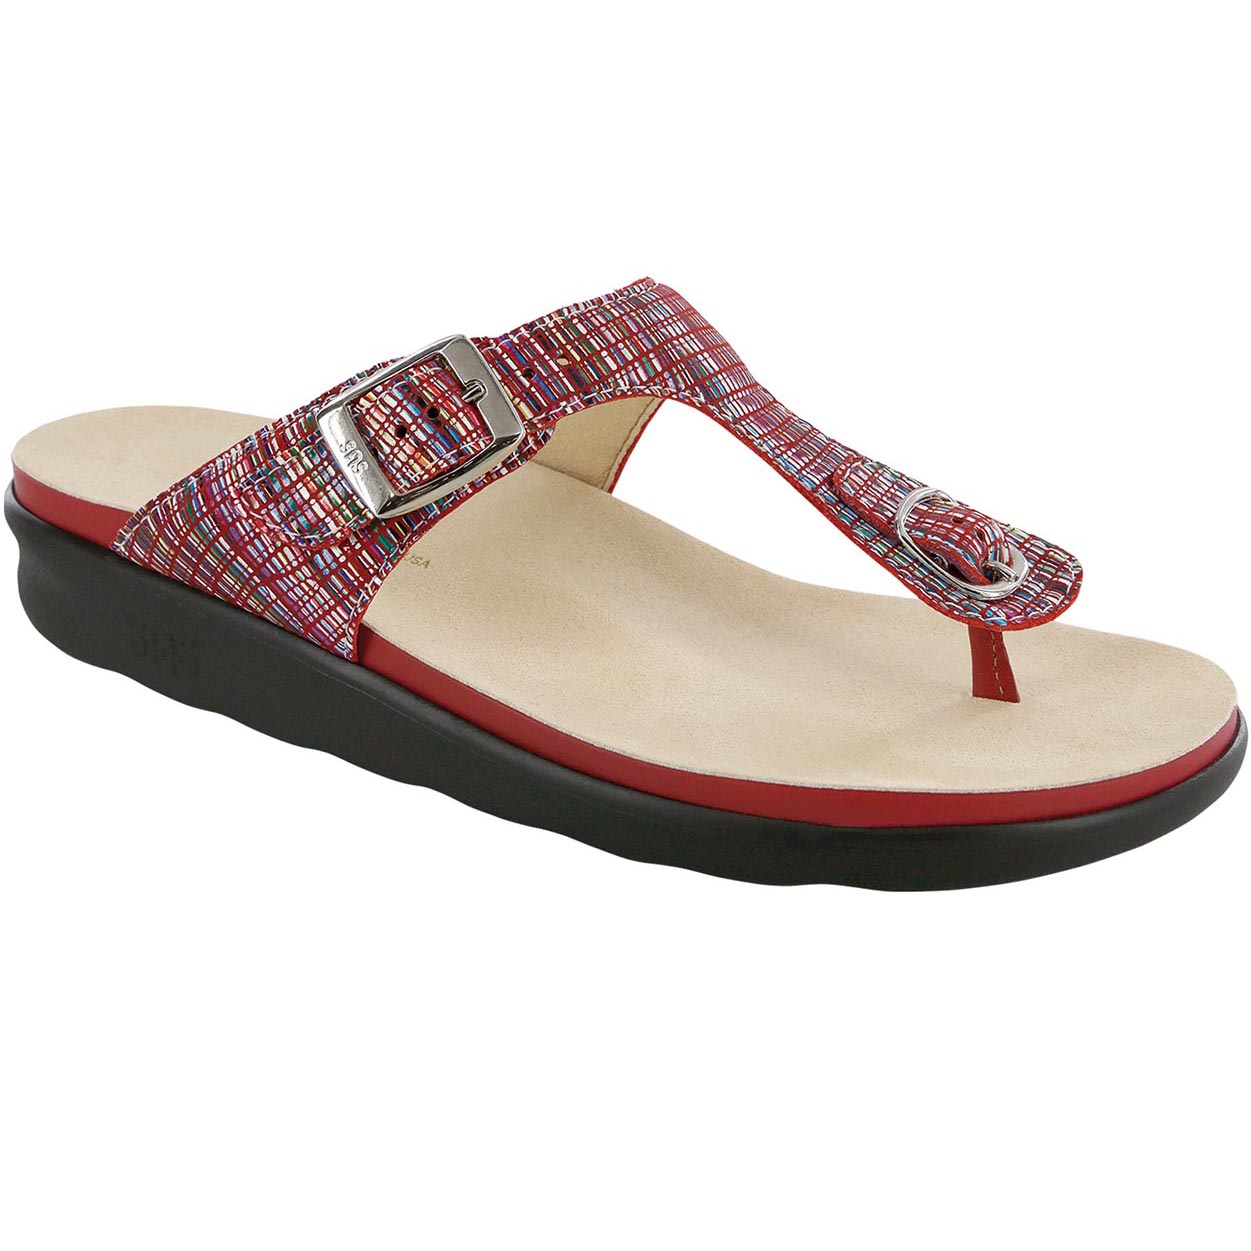 RAINBOW RED | SAS Albuquerque Women's Sanibel - Rainbow Red at Brandy's Shoes Made in USA